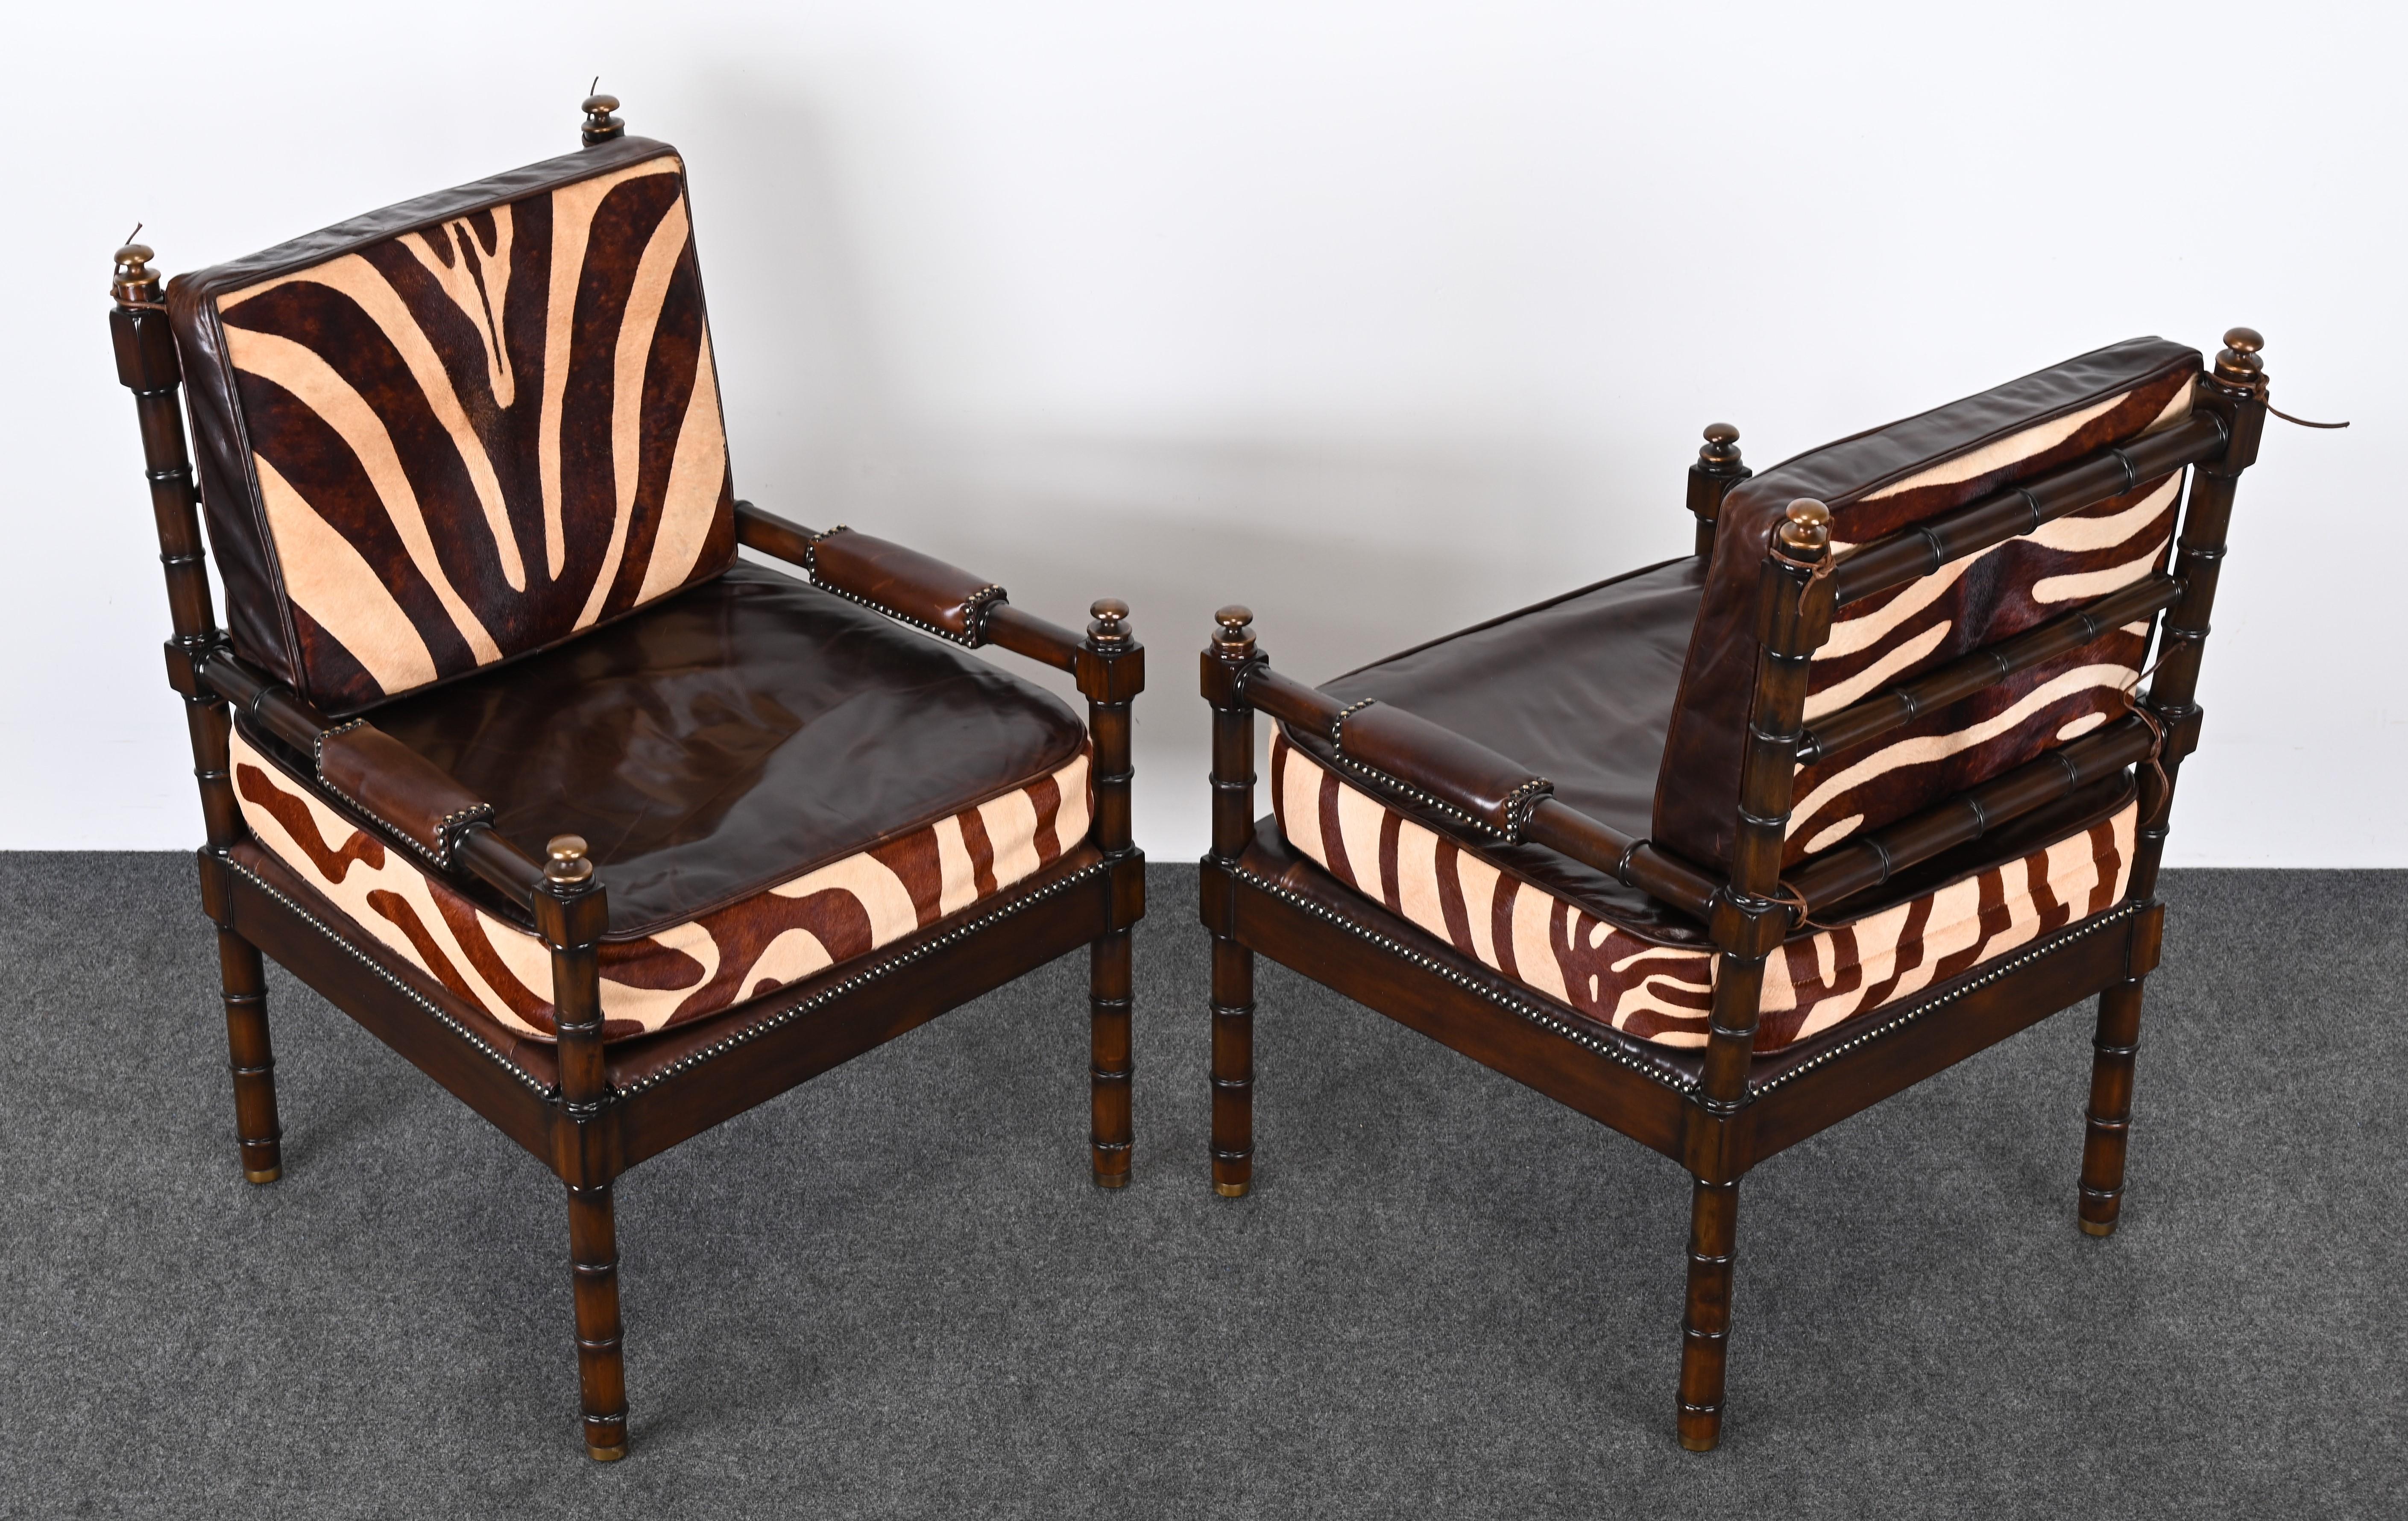 Anglo-Indian Maitland Smith Bamboo Armchairs with Cowhide Zebra Print Leather Seats, 1990s For Sale